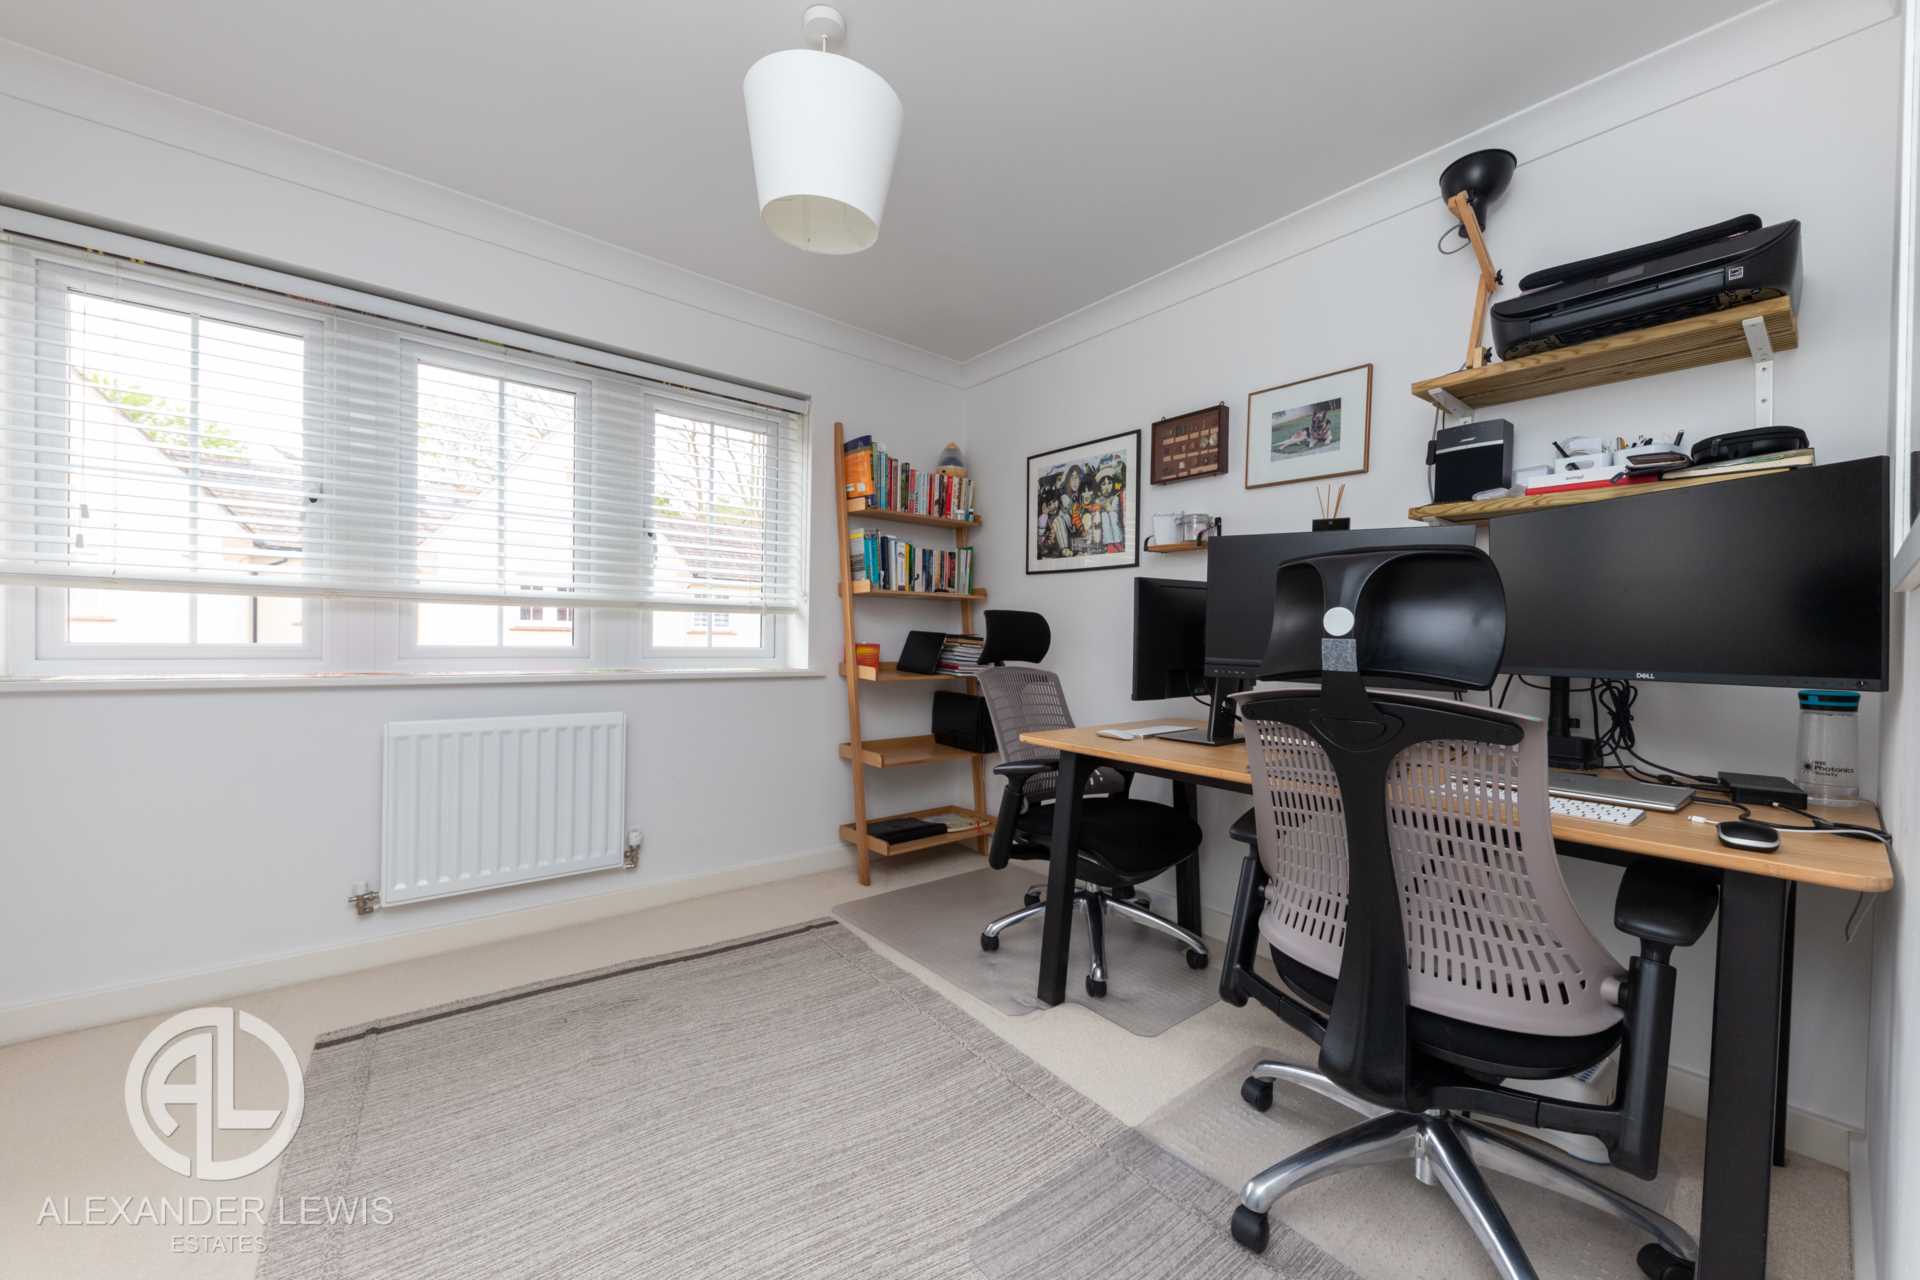 Lindsell Avenue, Letchworth Garden City, SG6 4DQ, Image 9